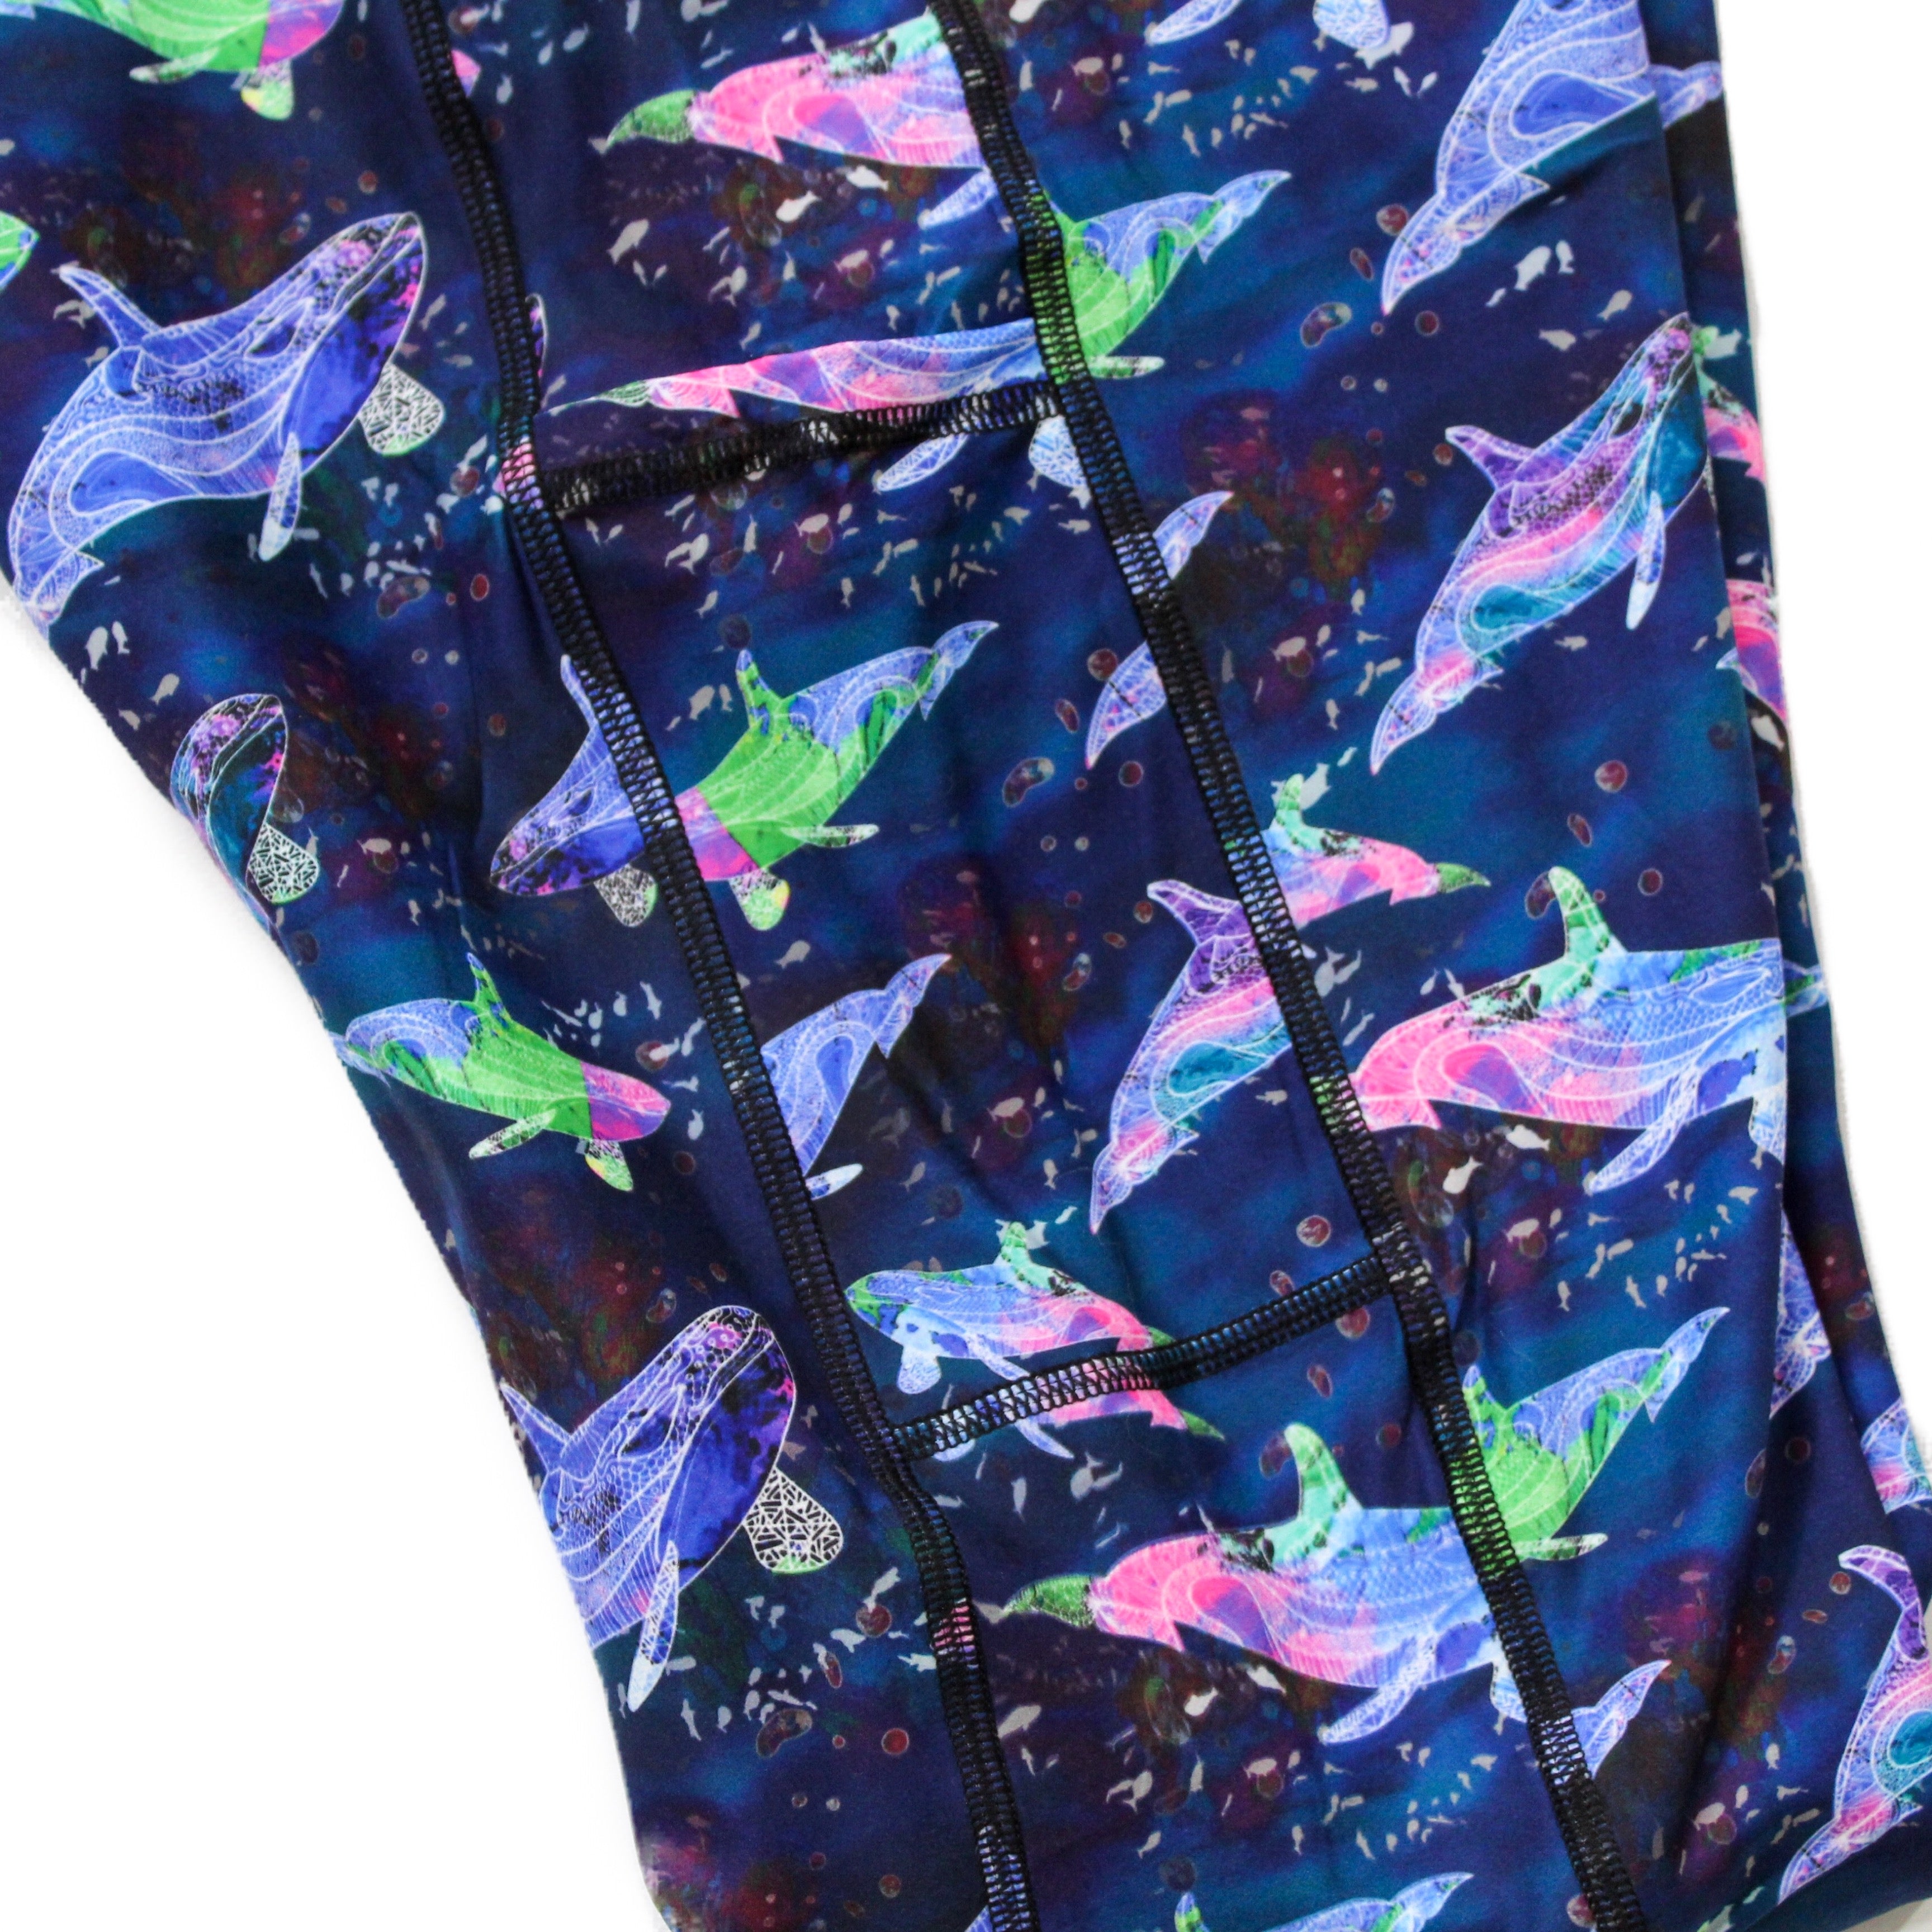 Whales full length legging with pockets